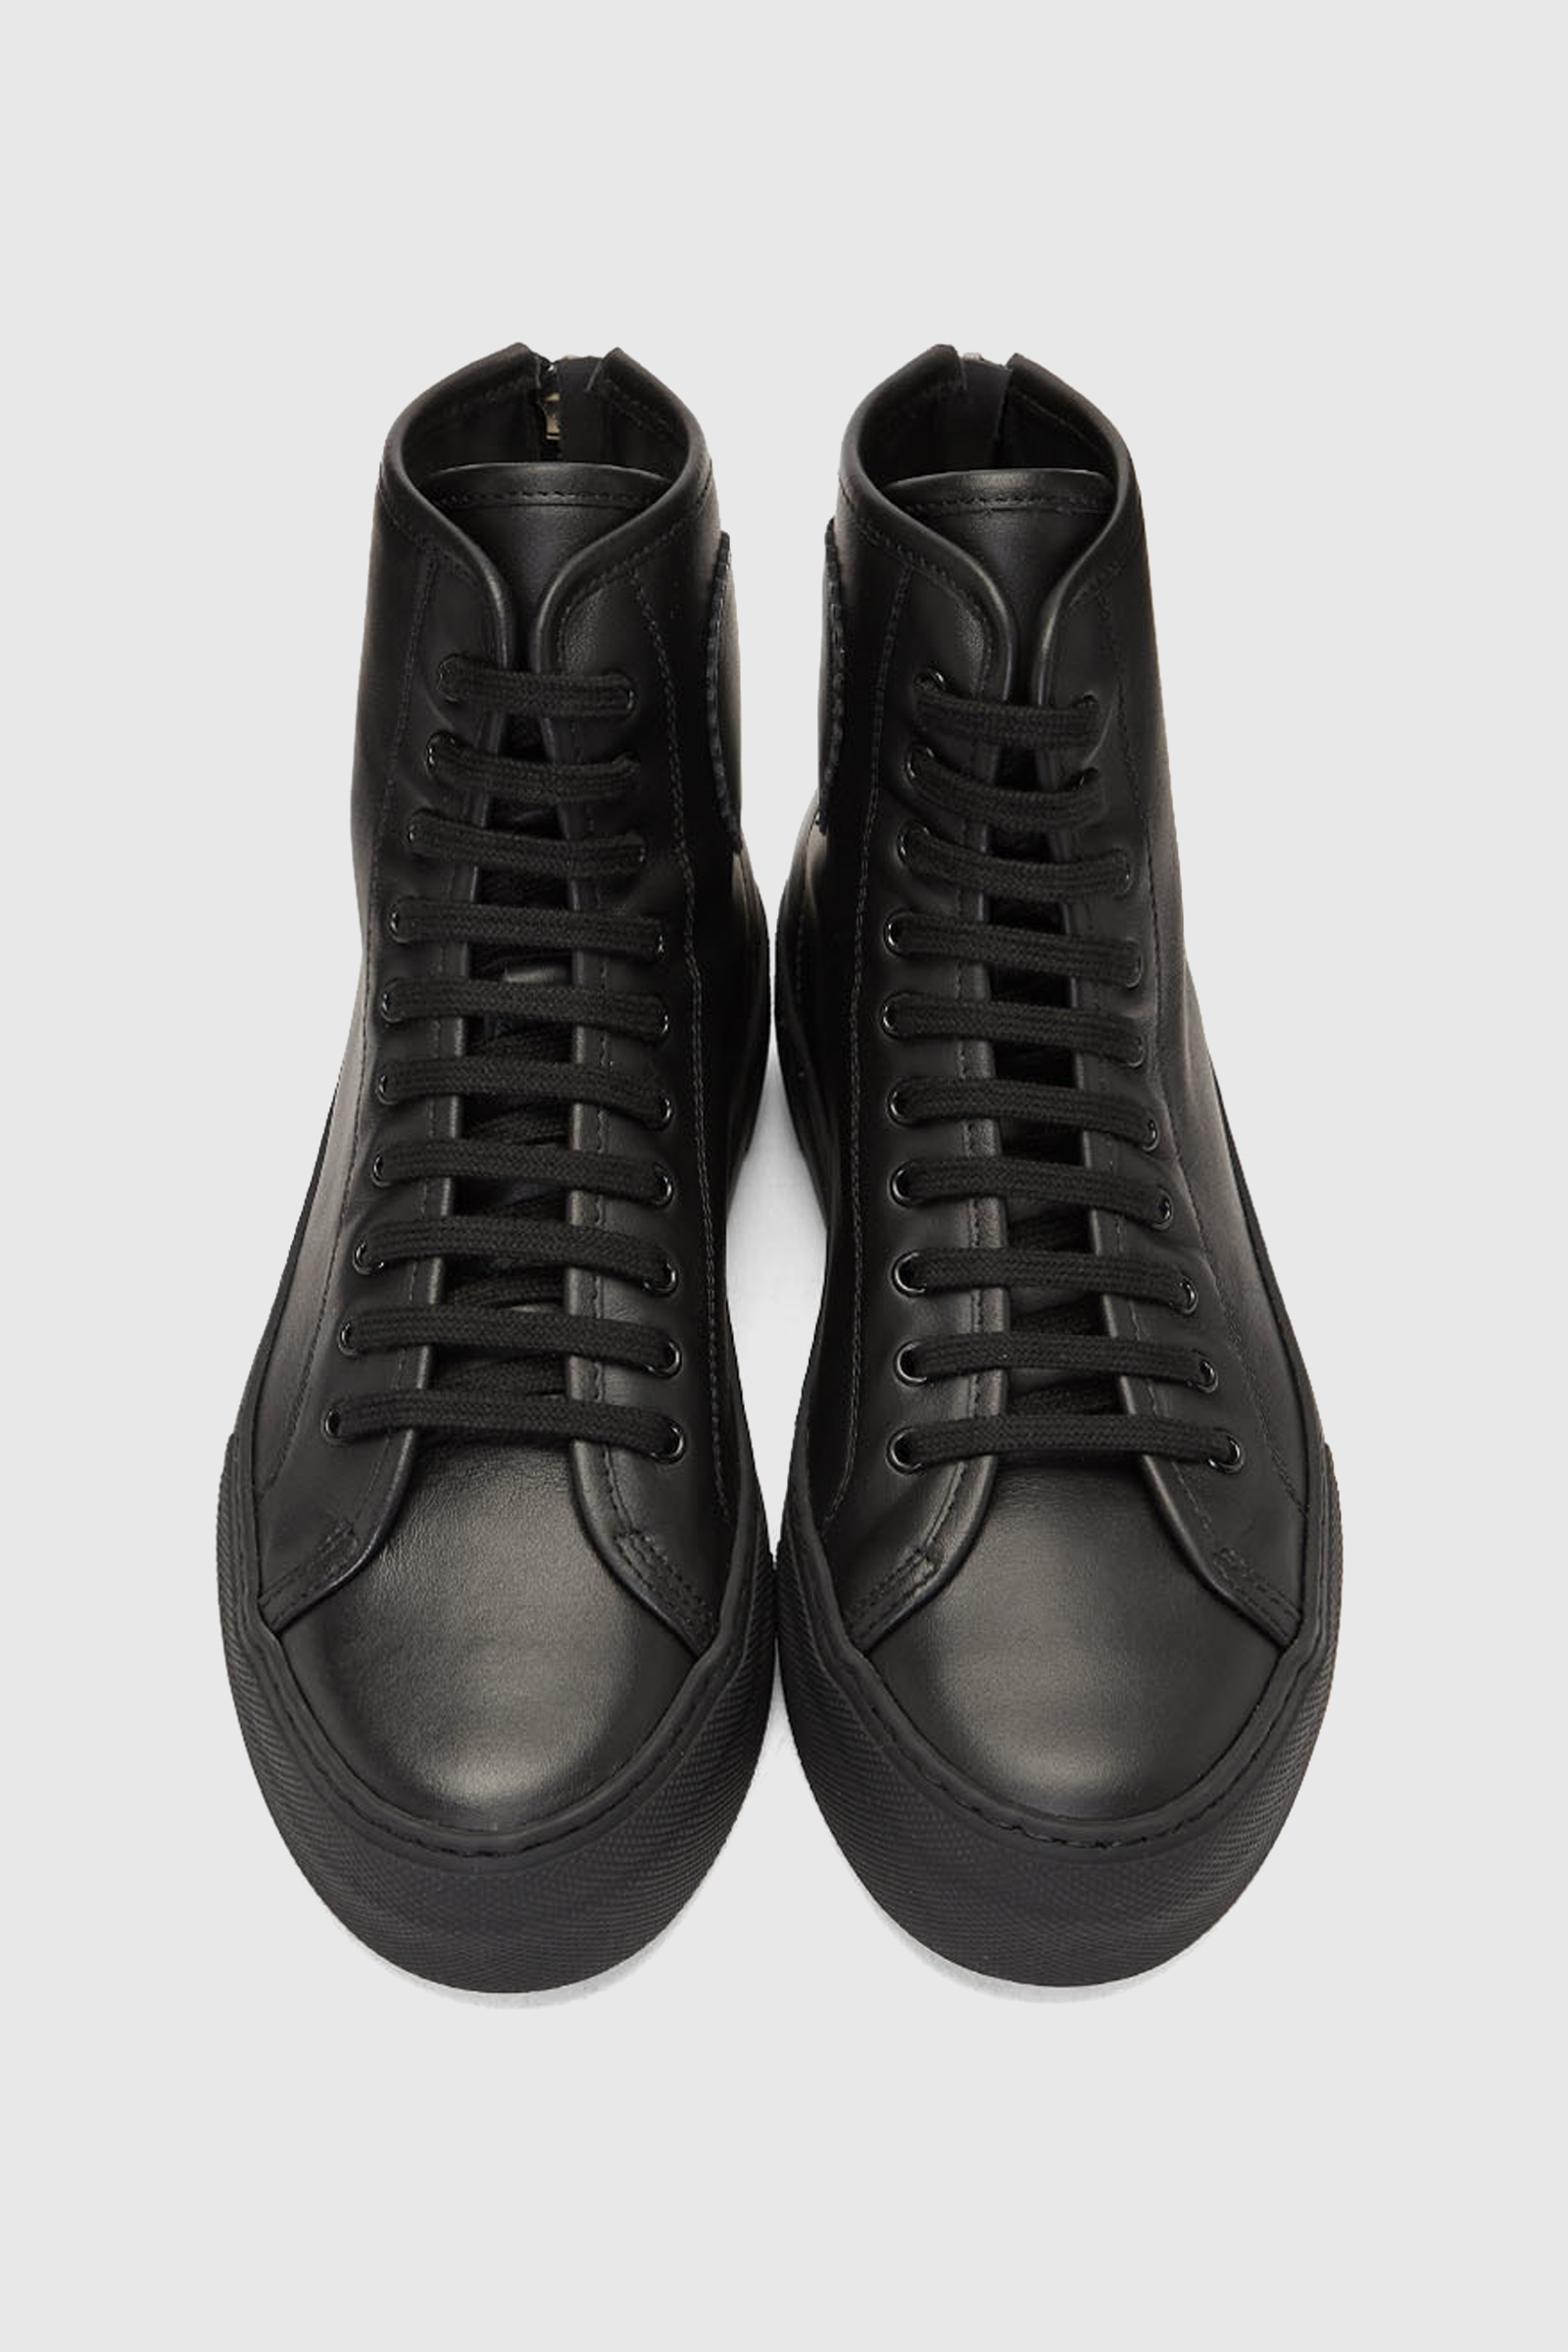 common projects tournament high sneakers